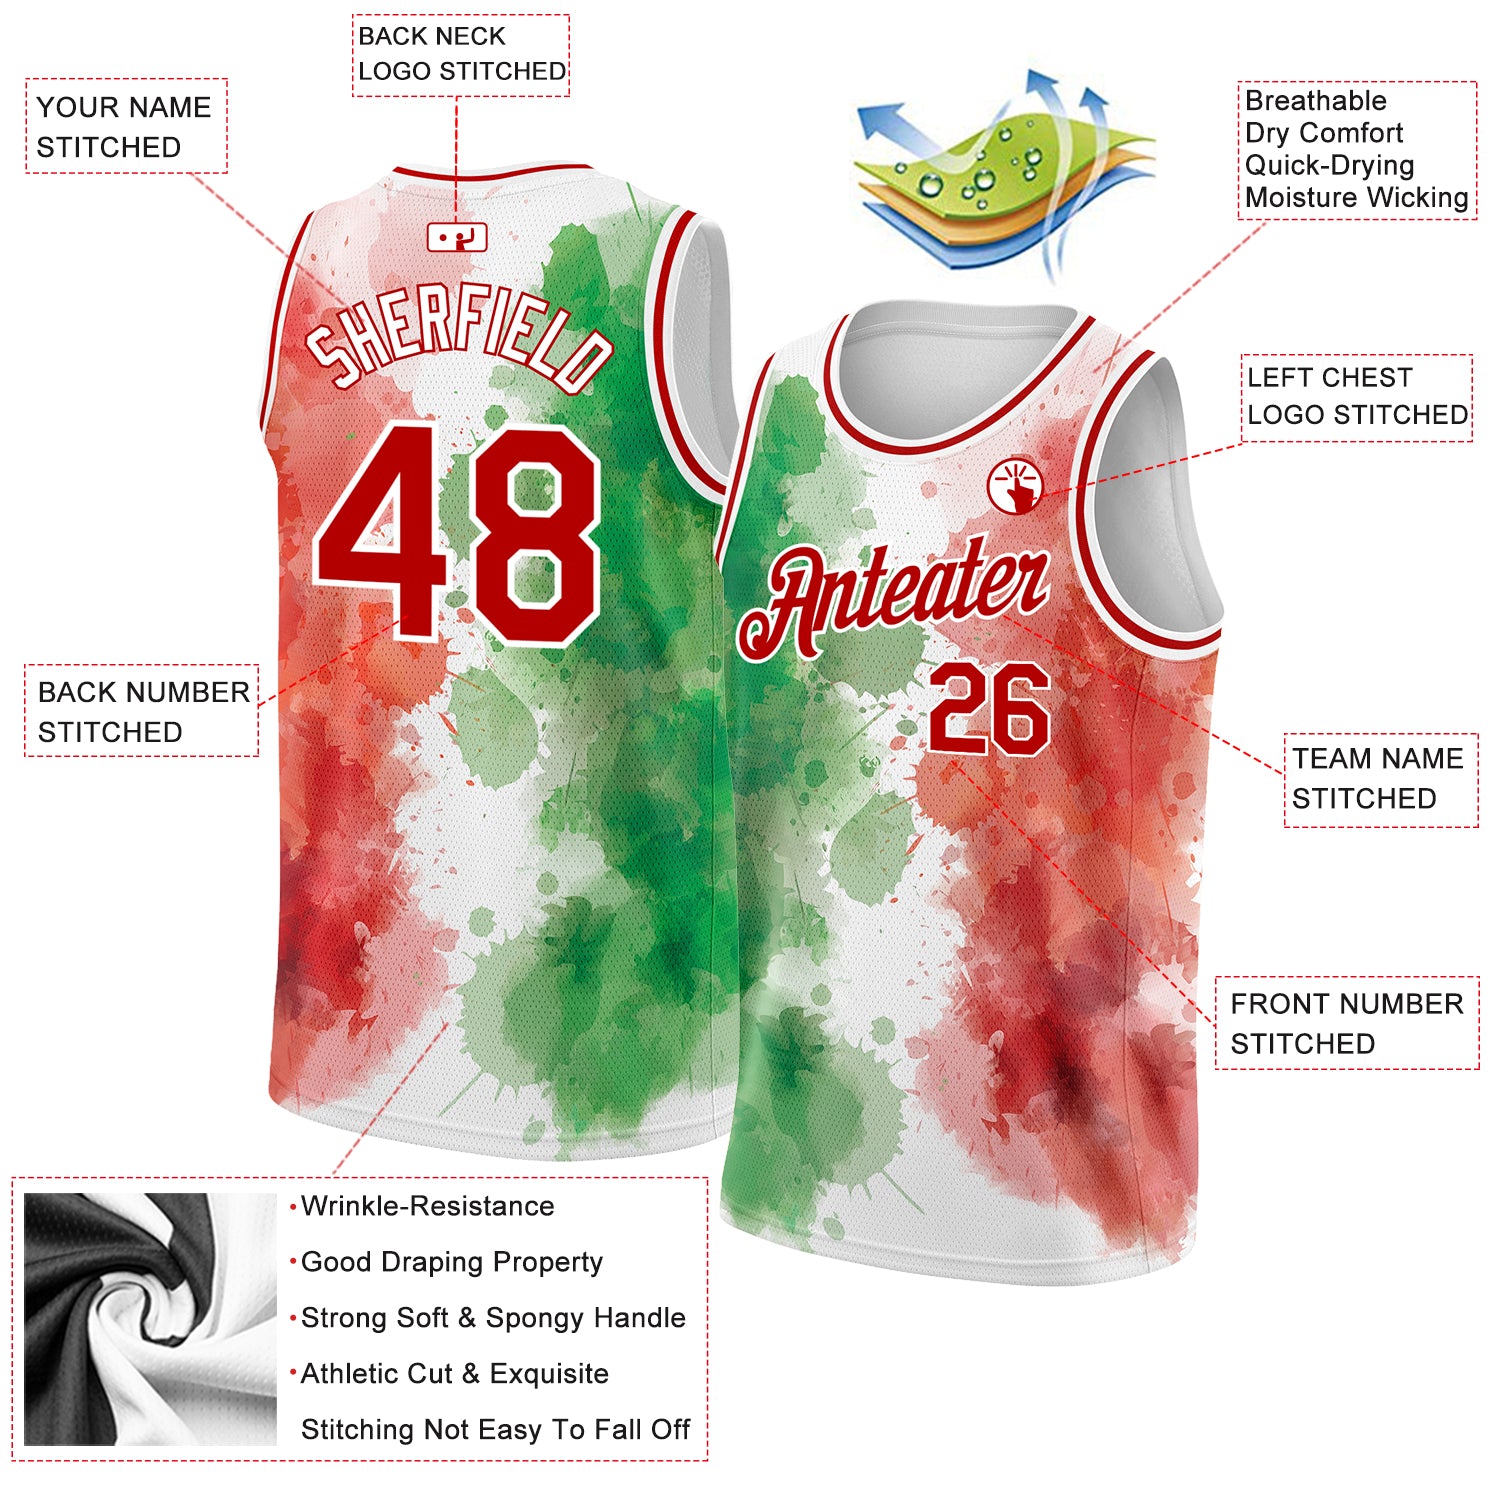 Custom Cream Kelly Green-Red Authentic Throwback Basketball Jersey in 2023